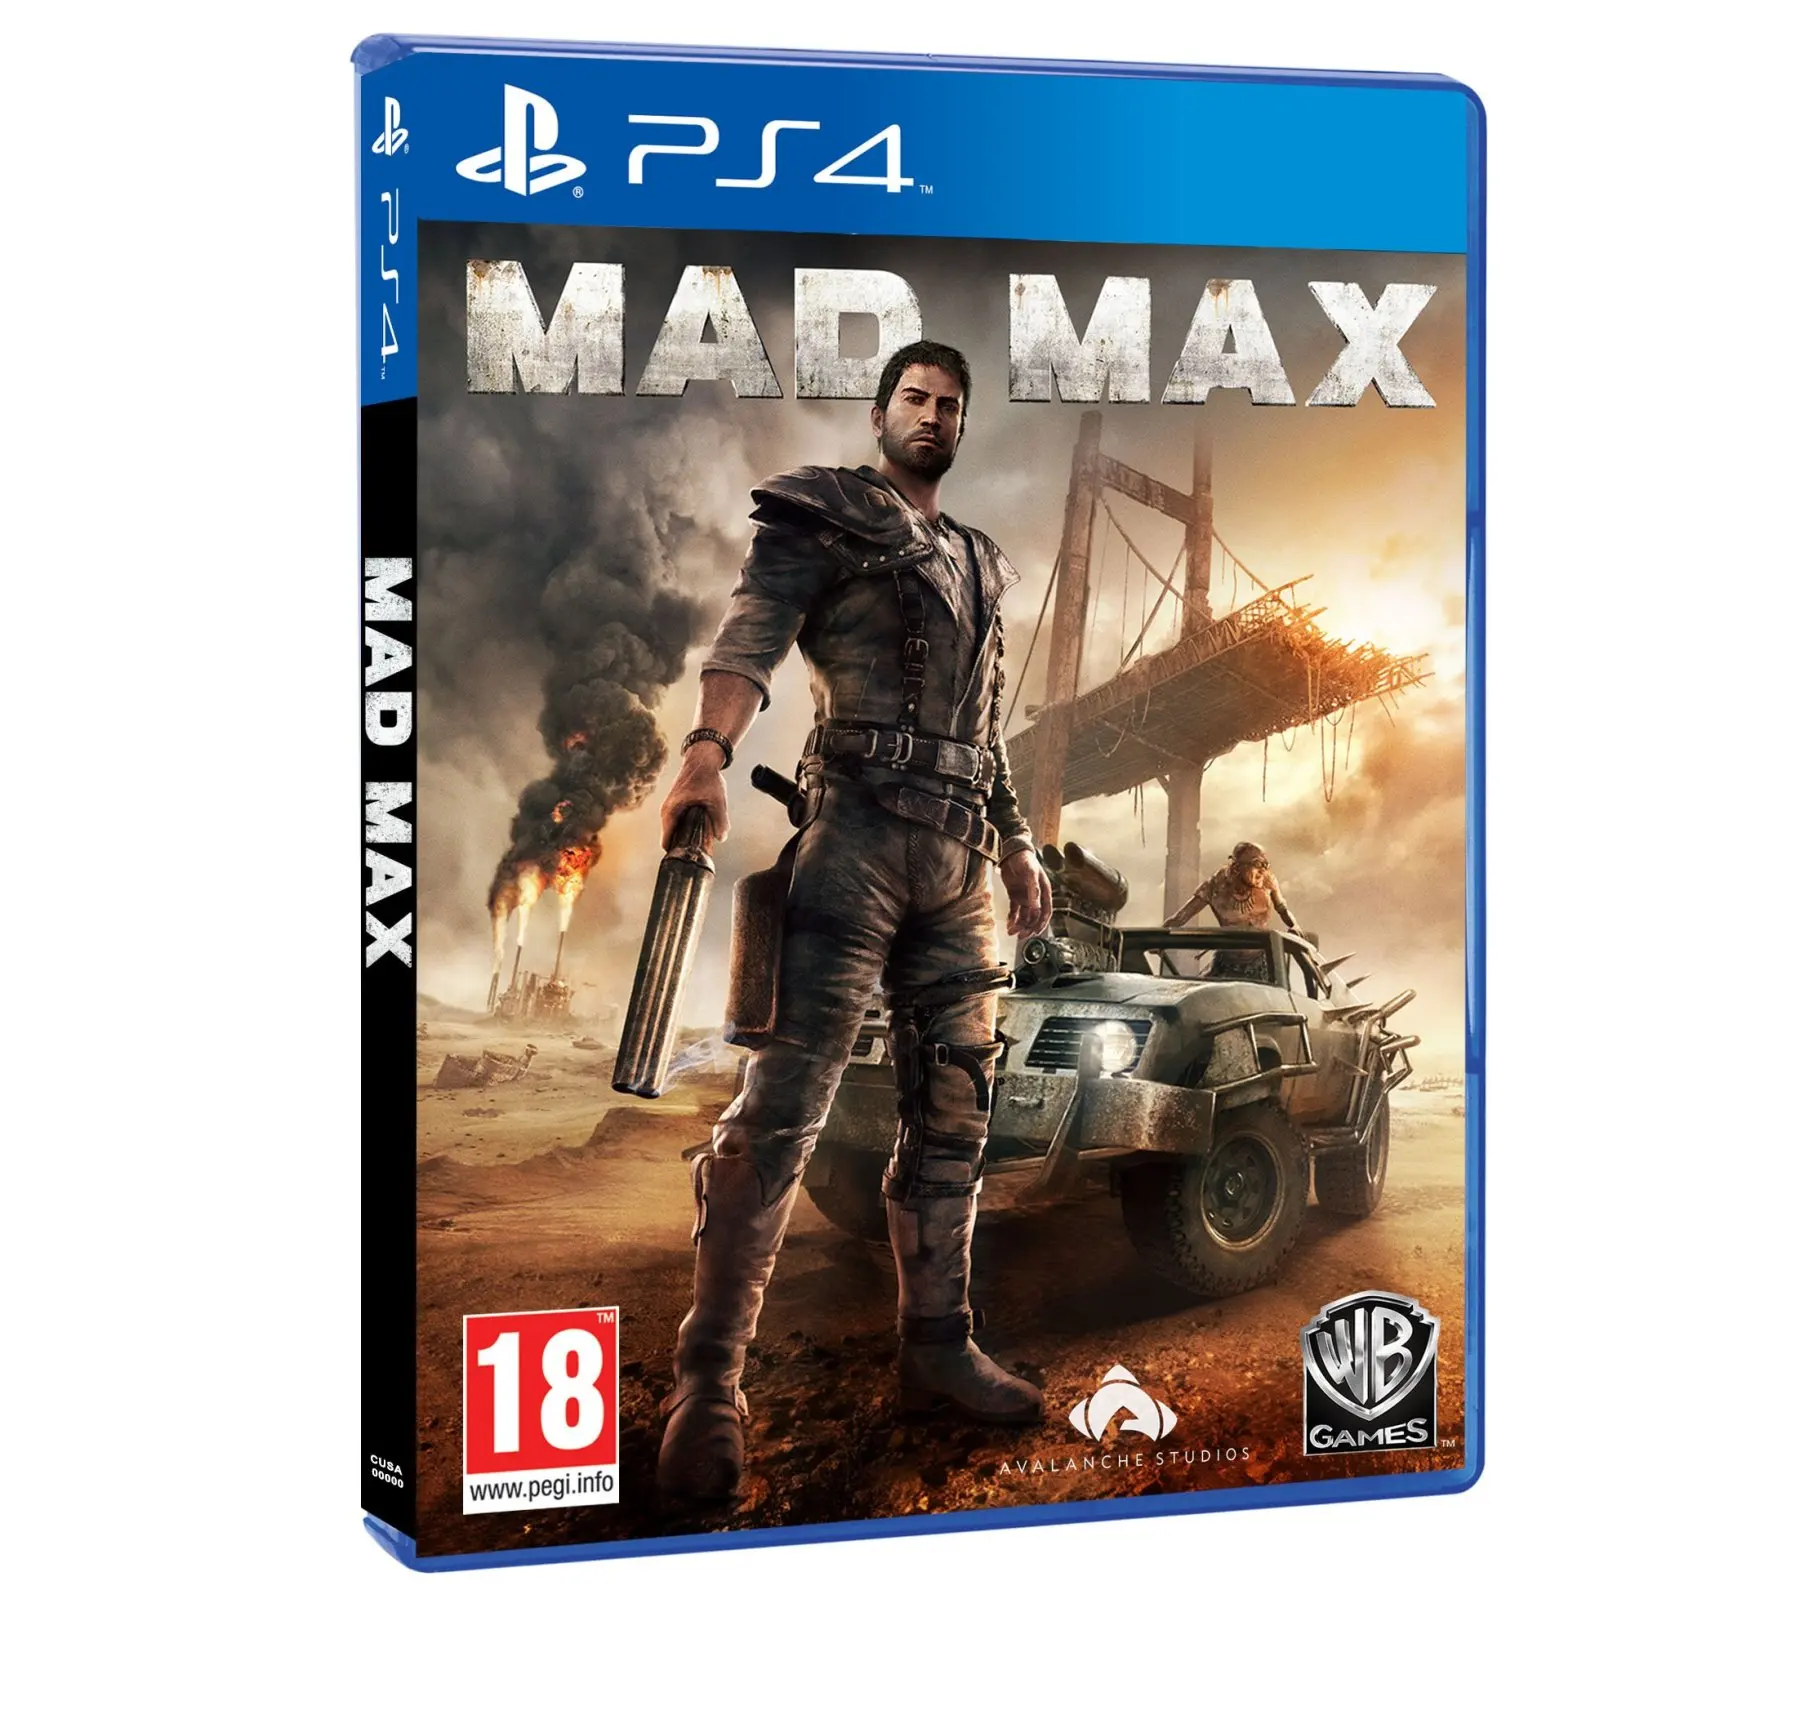 Mad Max Ps4 Playstation 4 Disk Version Video Game Controller Gaming Station Console Gamepad Consoles Super - Game Deals - AliExpress